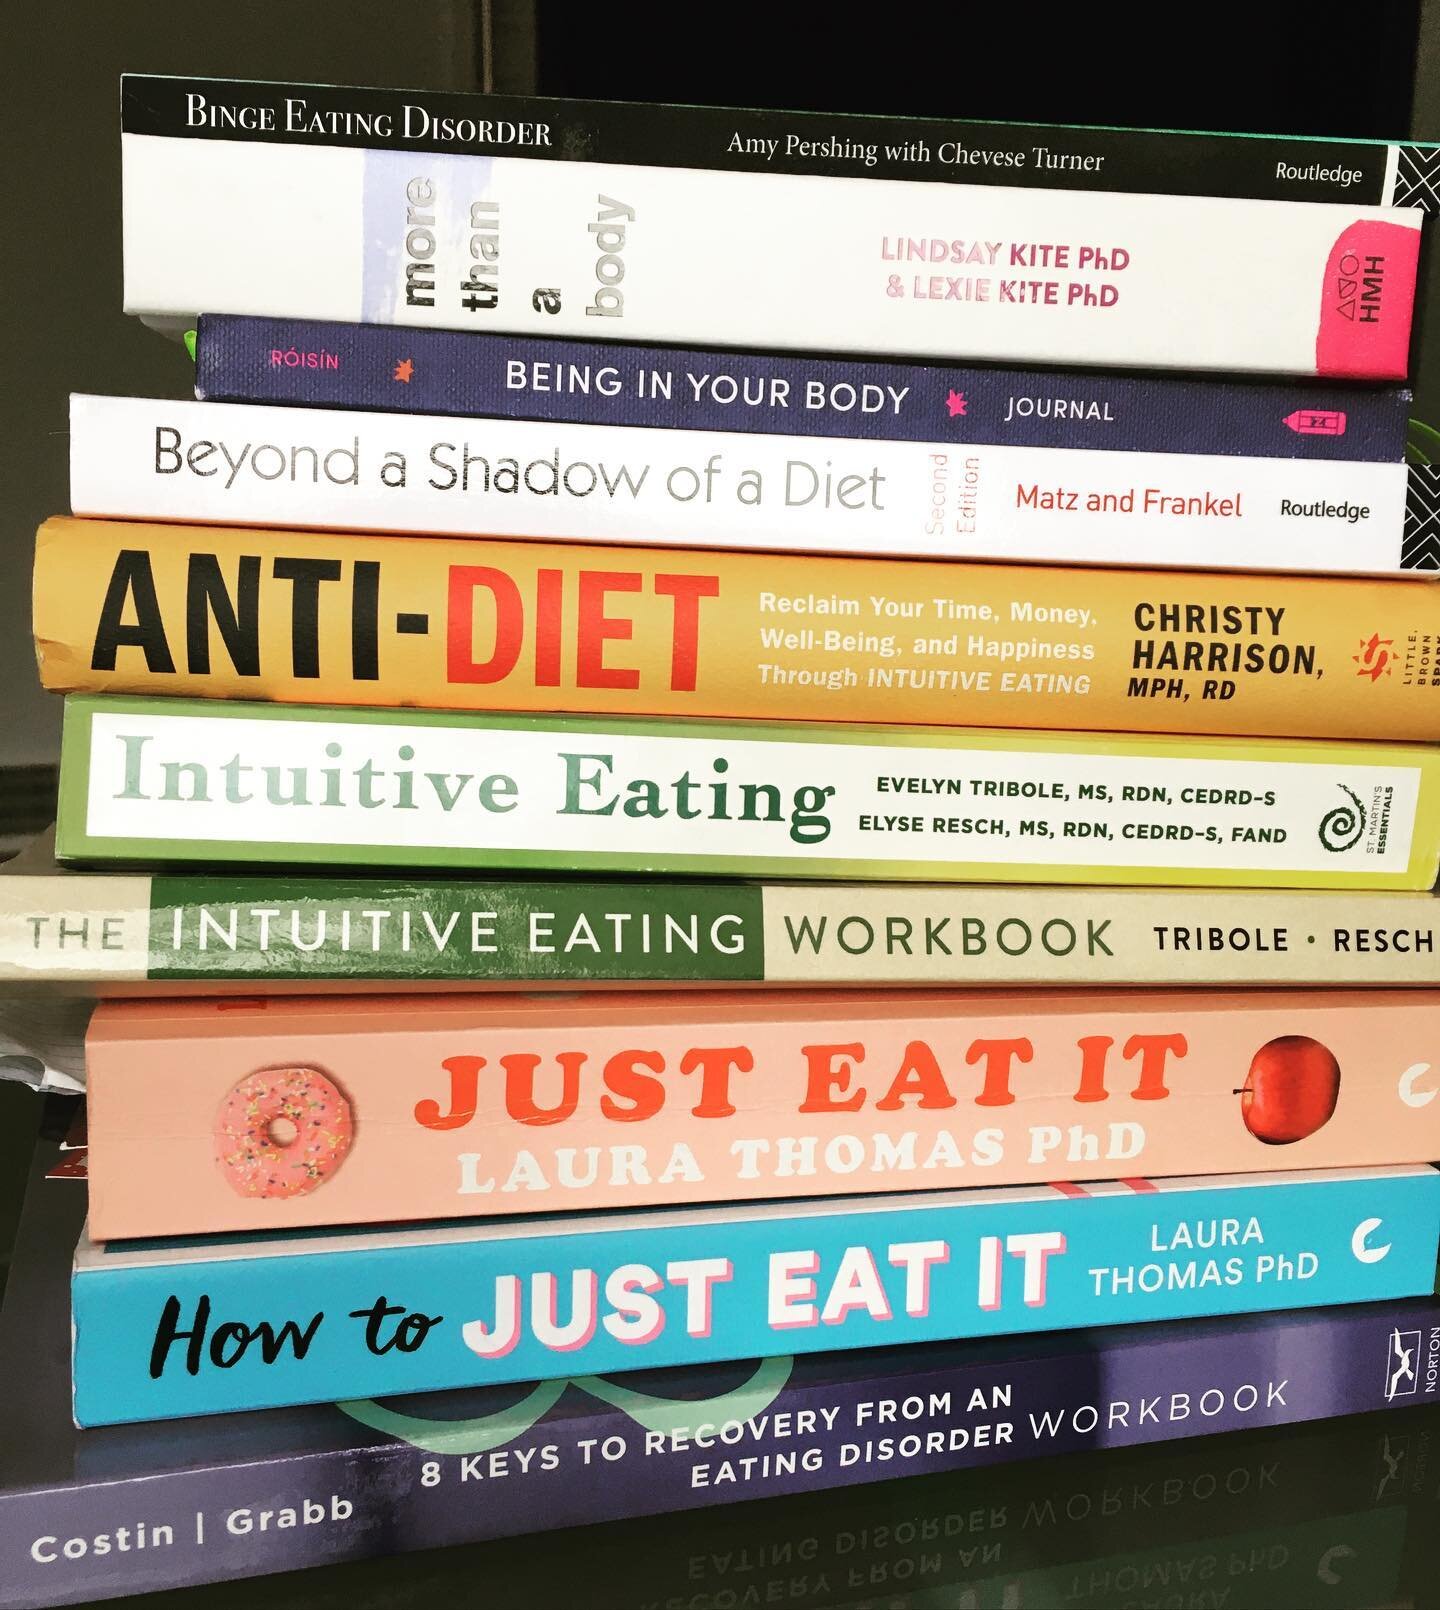 Are you a 📚 🐛 like me? Sharing some of my favorite Intuitive Eating, ED recovery, and anti-diet books as inspiration if you&rsquo;re starting to explore your relationship with food and your body!
.
Do you have a favorite? Share with me in the comme